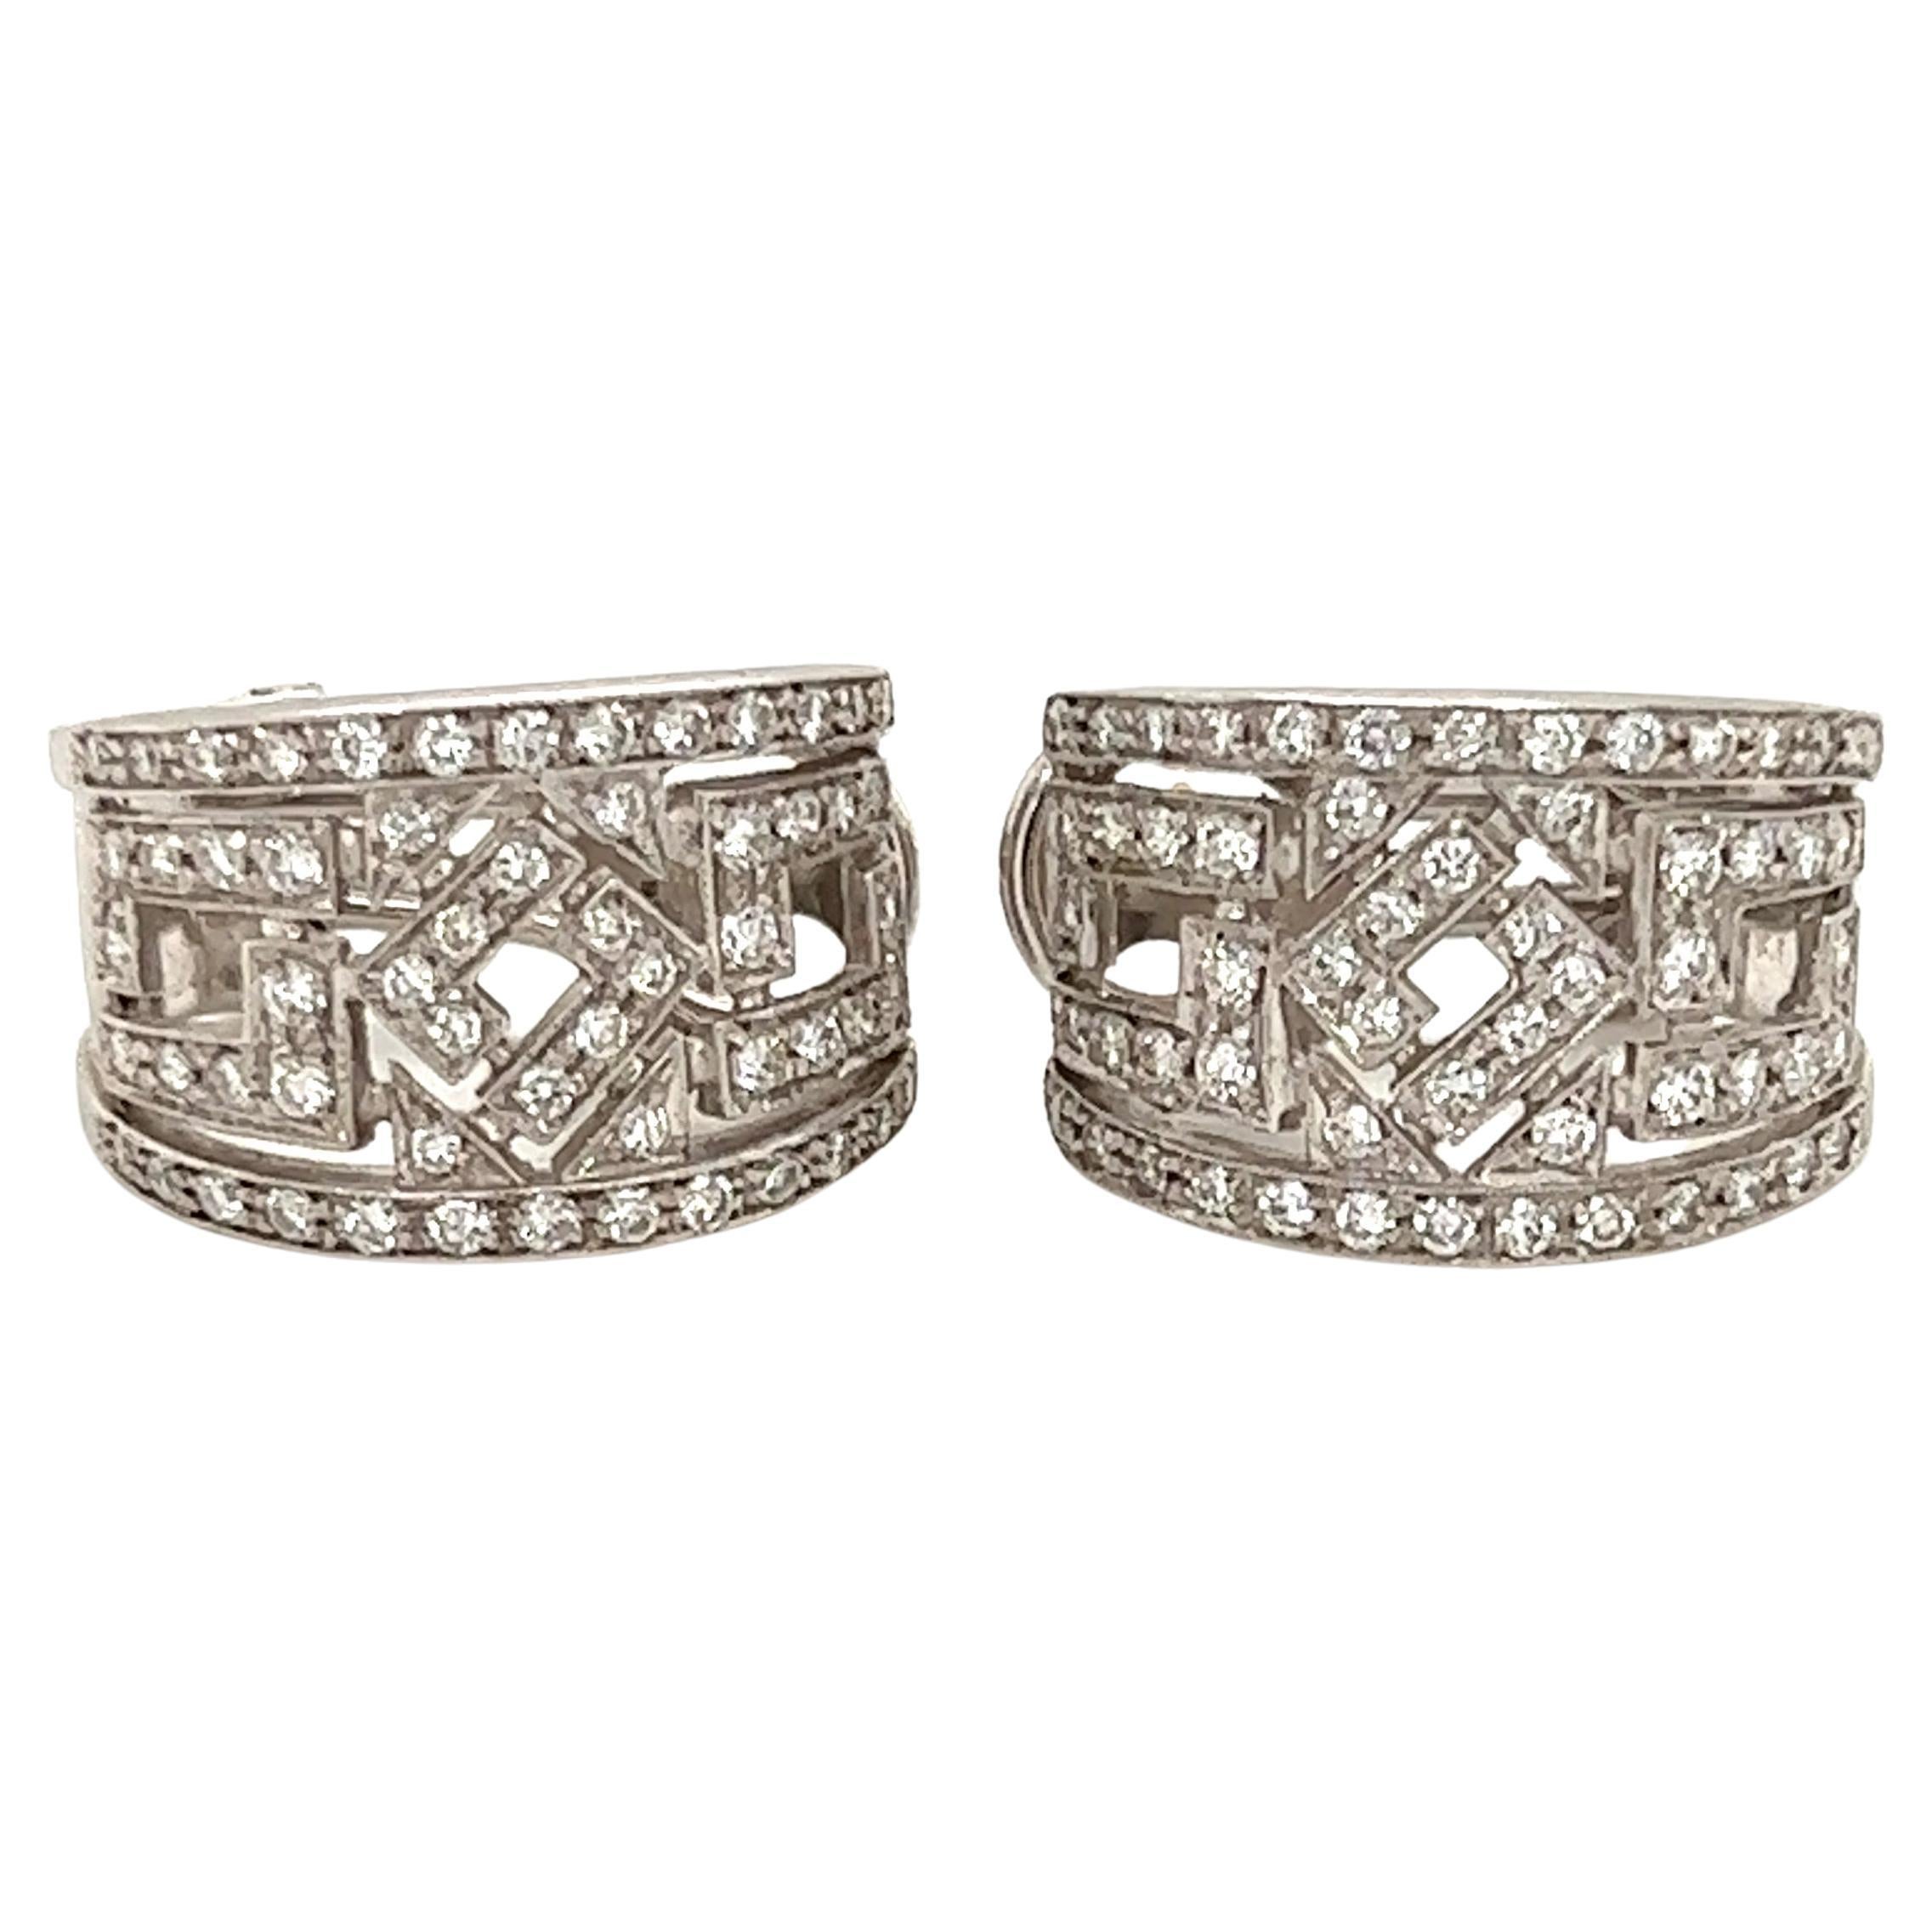 From Chimento featuring a beautiful open style design on half hoop earrings with post omega backs in the huggie style. Authentic and crafted from 18k white gold featuring a 13mm wide curved shape at the front set with sparkling diamonds, all